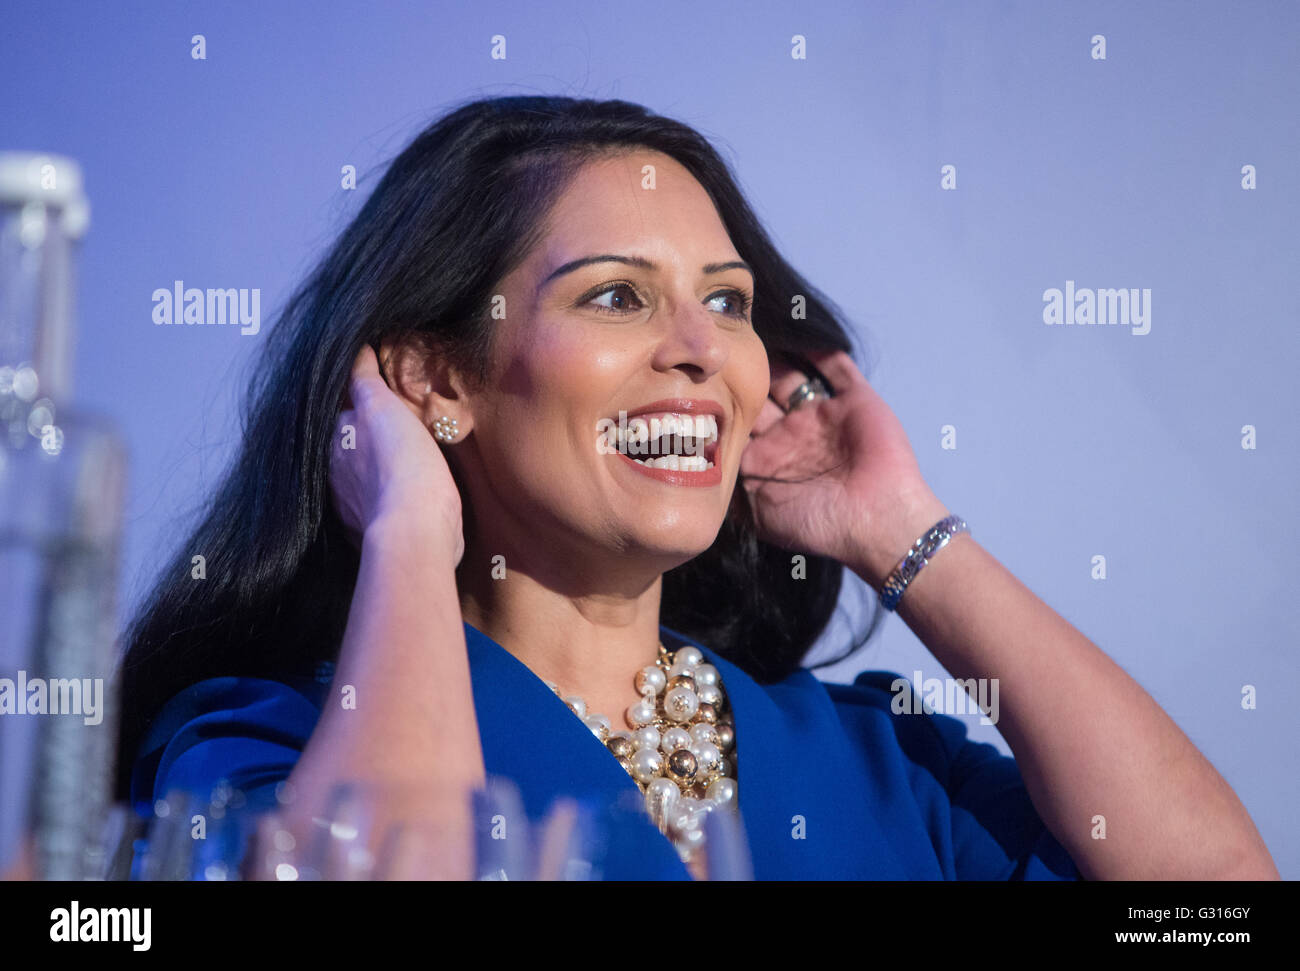 Priti Patel,minister for employment,at an event supporting 'Vote leave' in the EU referendum on June 23rd Stock Photo